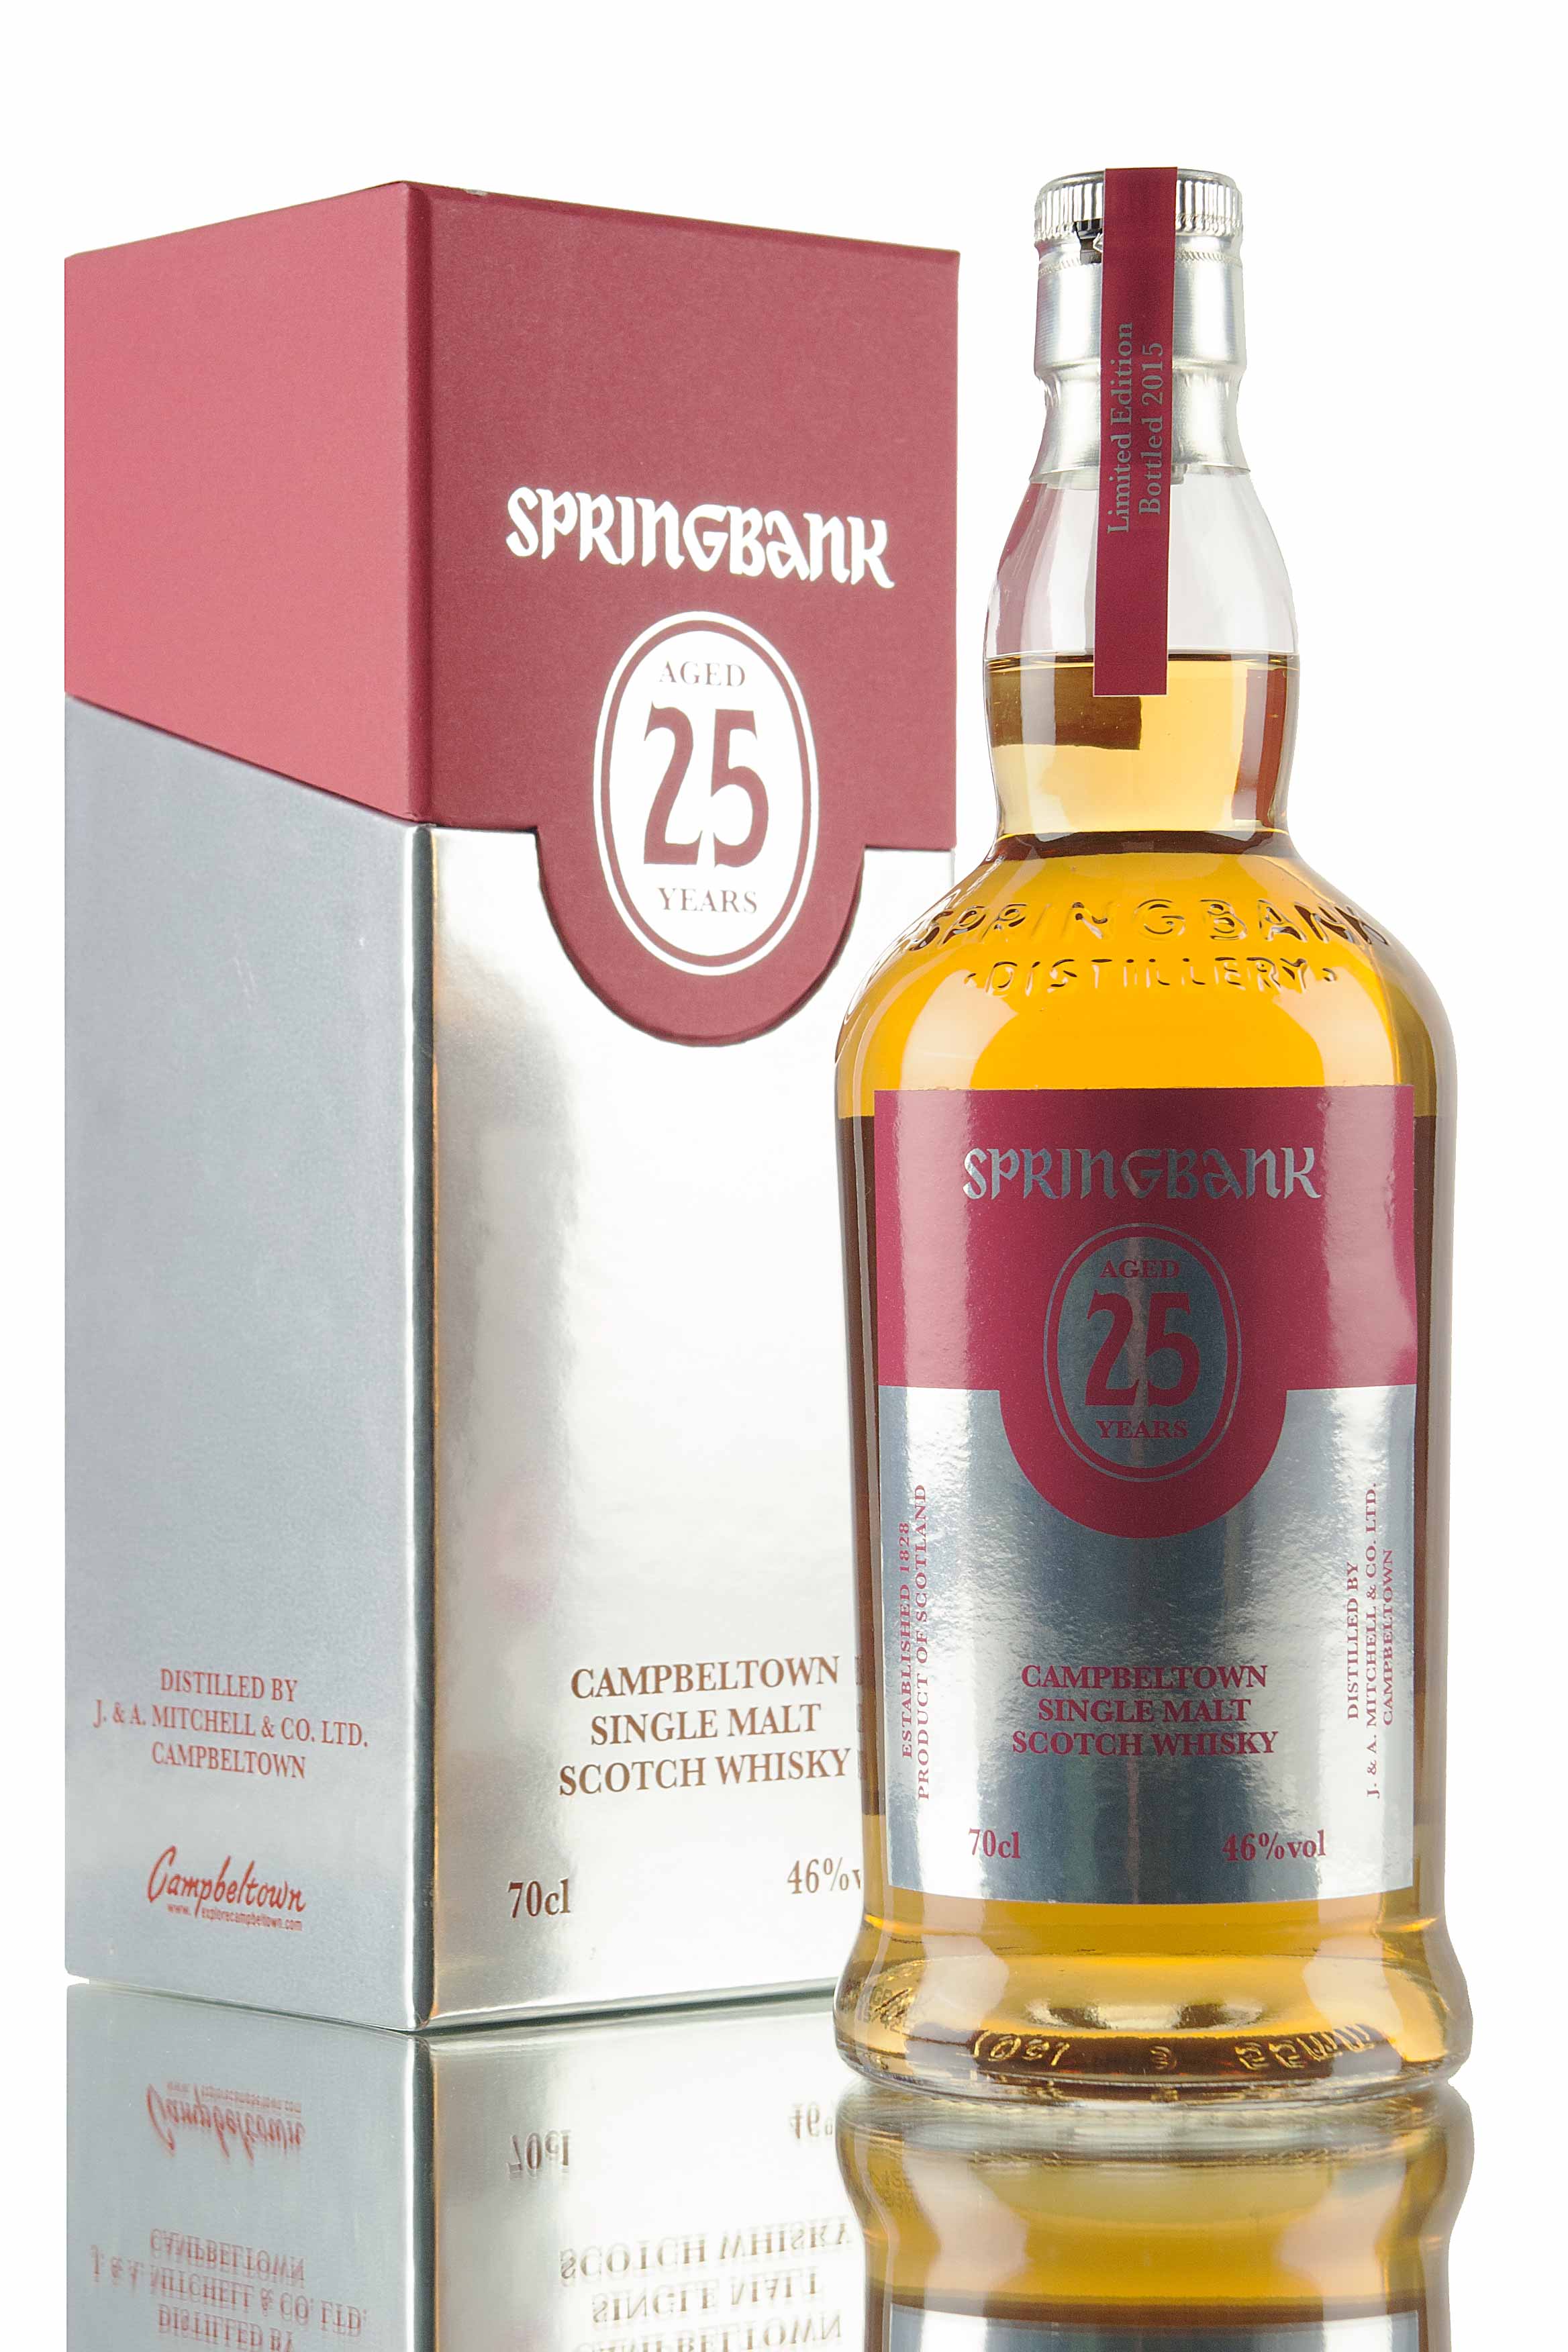 Springbank 25 Year Old / 2015 Release